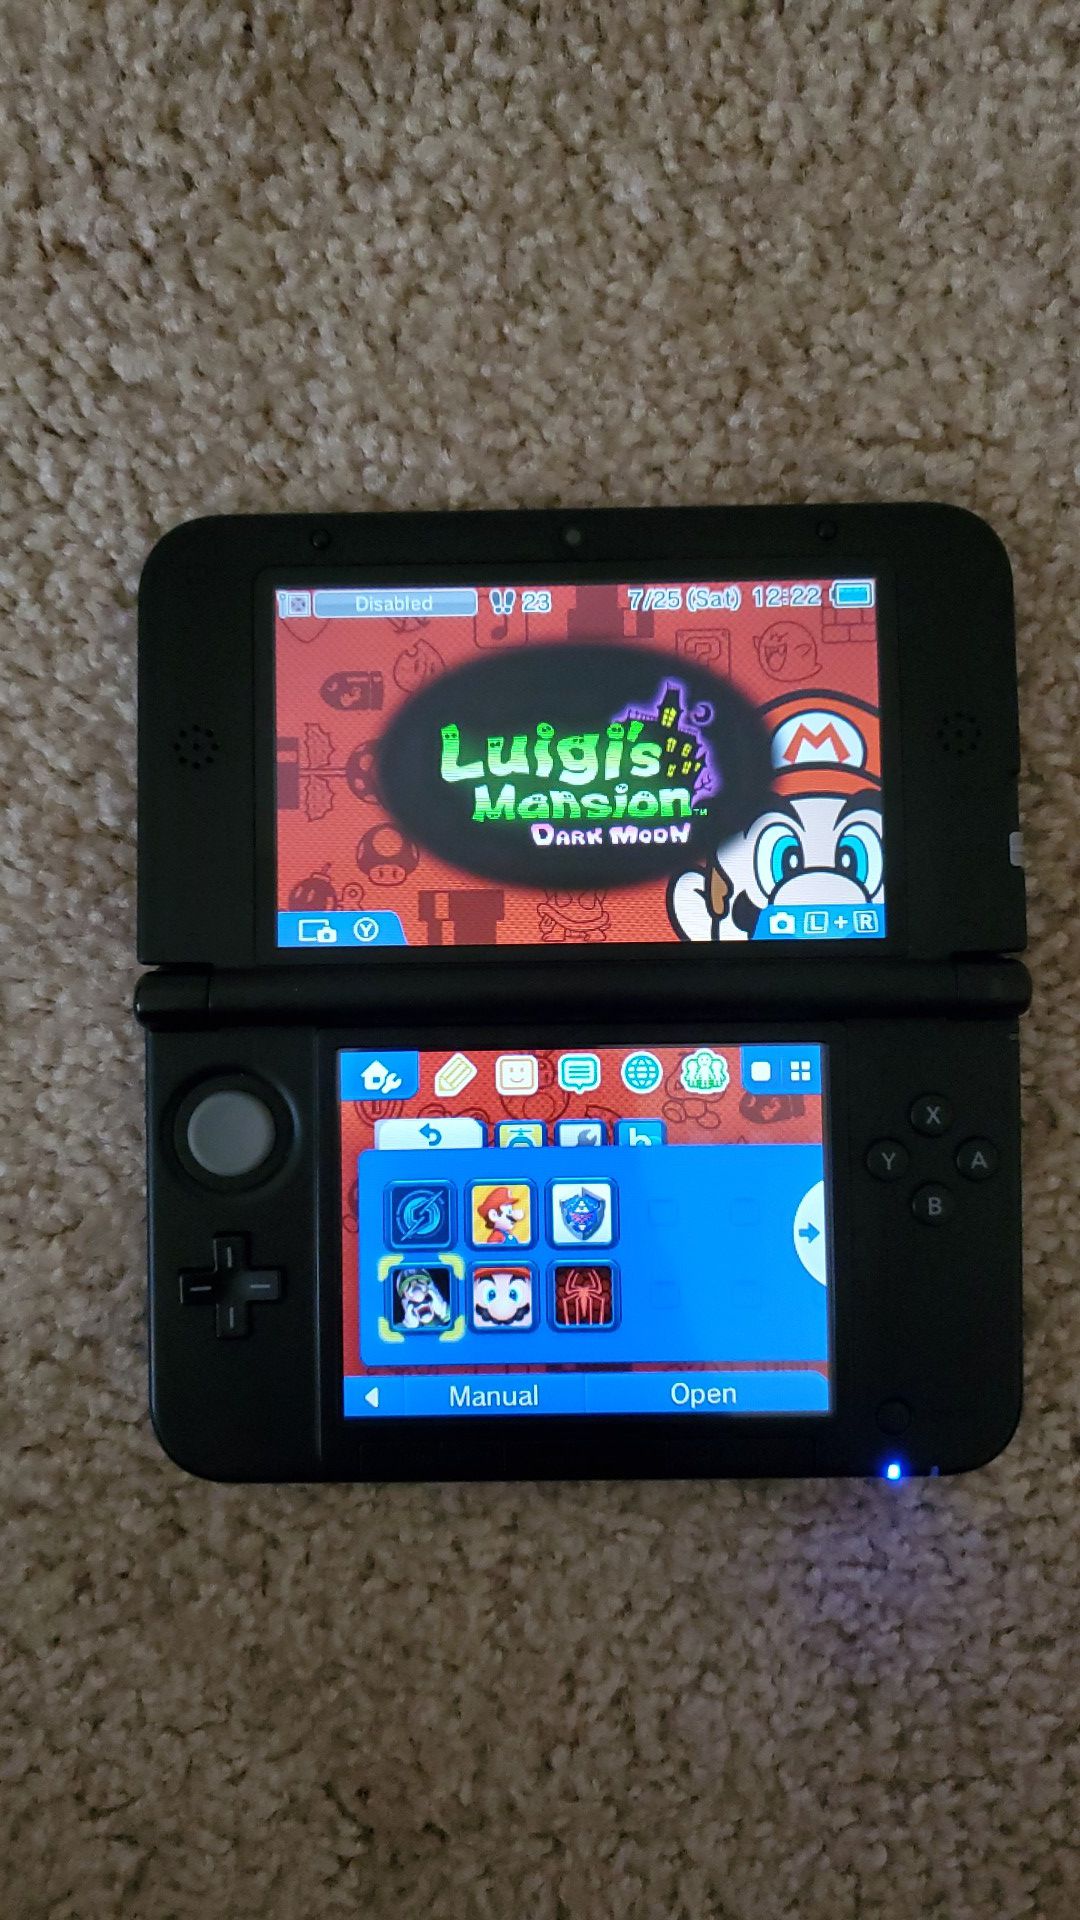 Modded Nintendo 3DS XL with 6 preinstalled games.